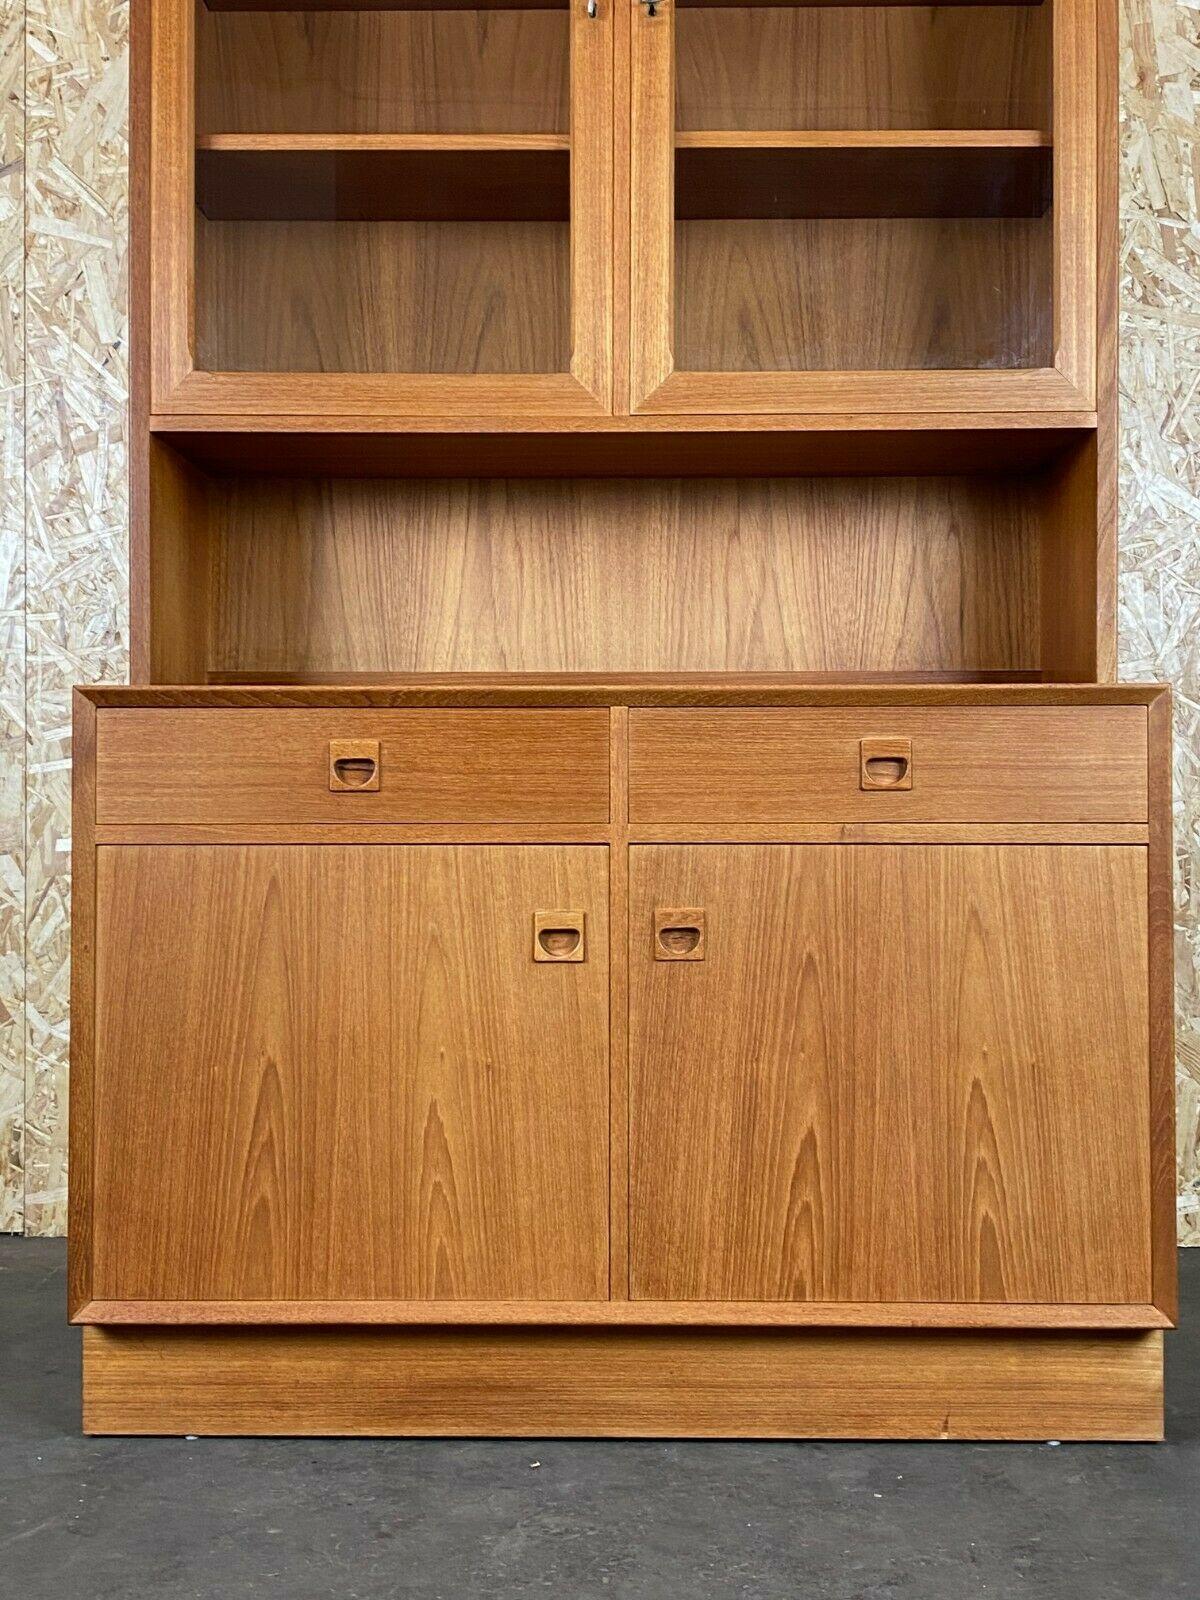 70s style bookcase